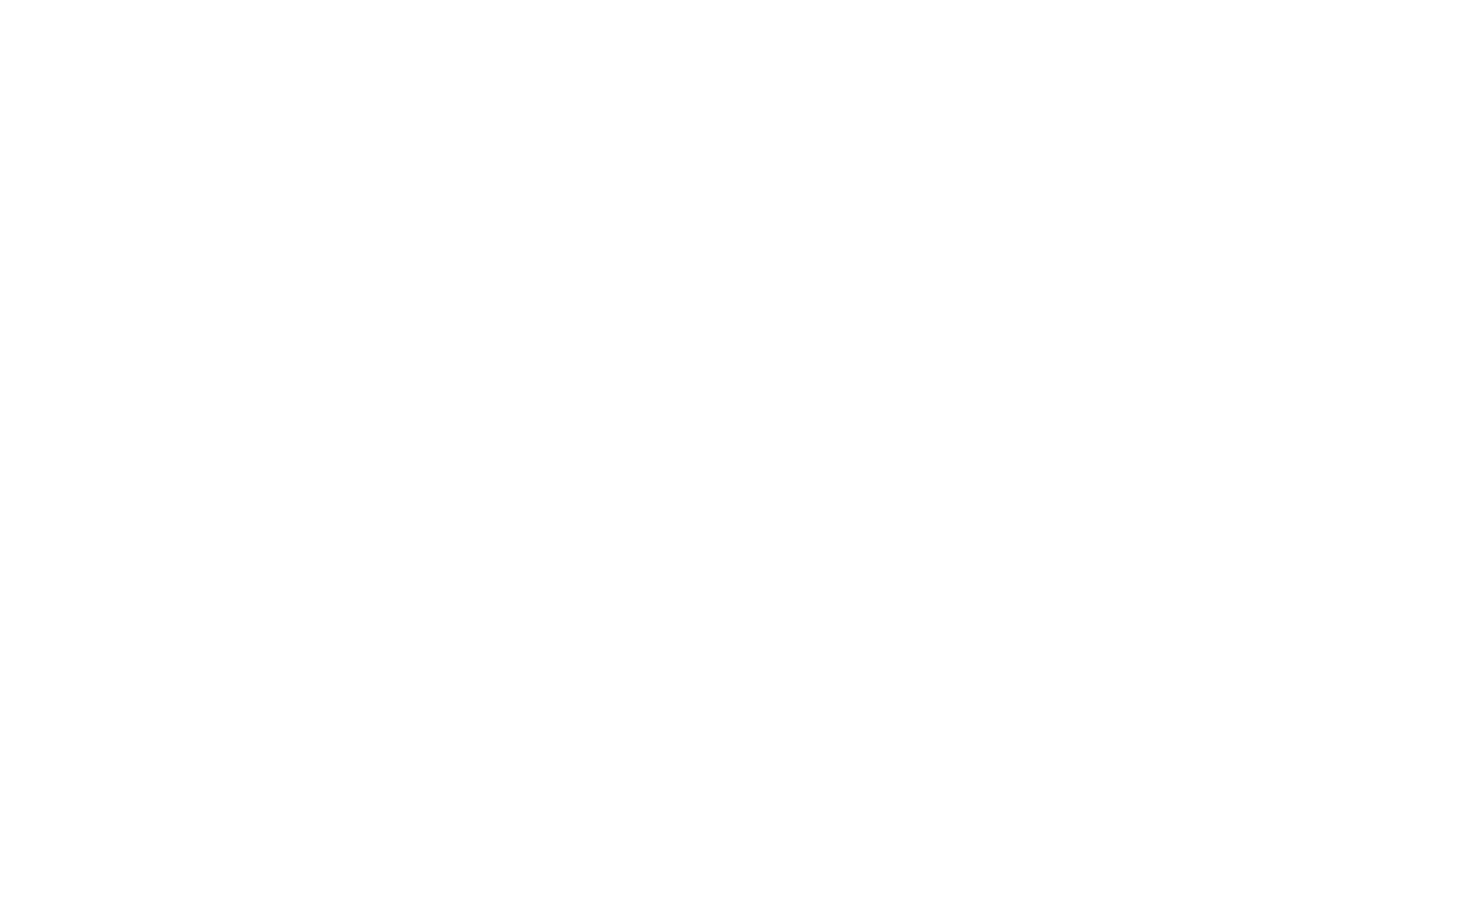 Littleton Area Chamber of Commerce serving Littleton, New Hampshire and the surrounding area.